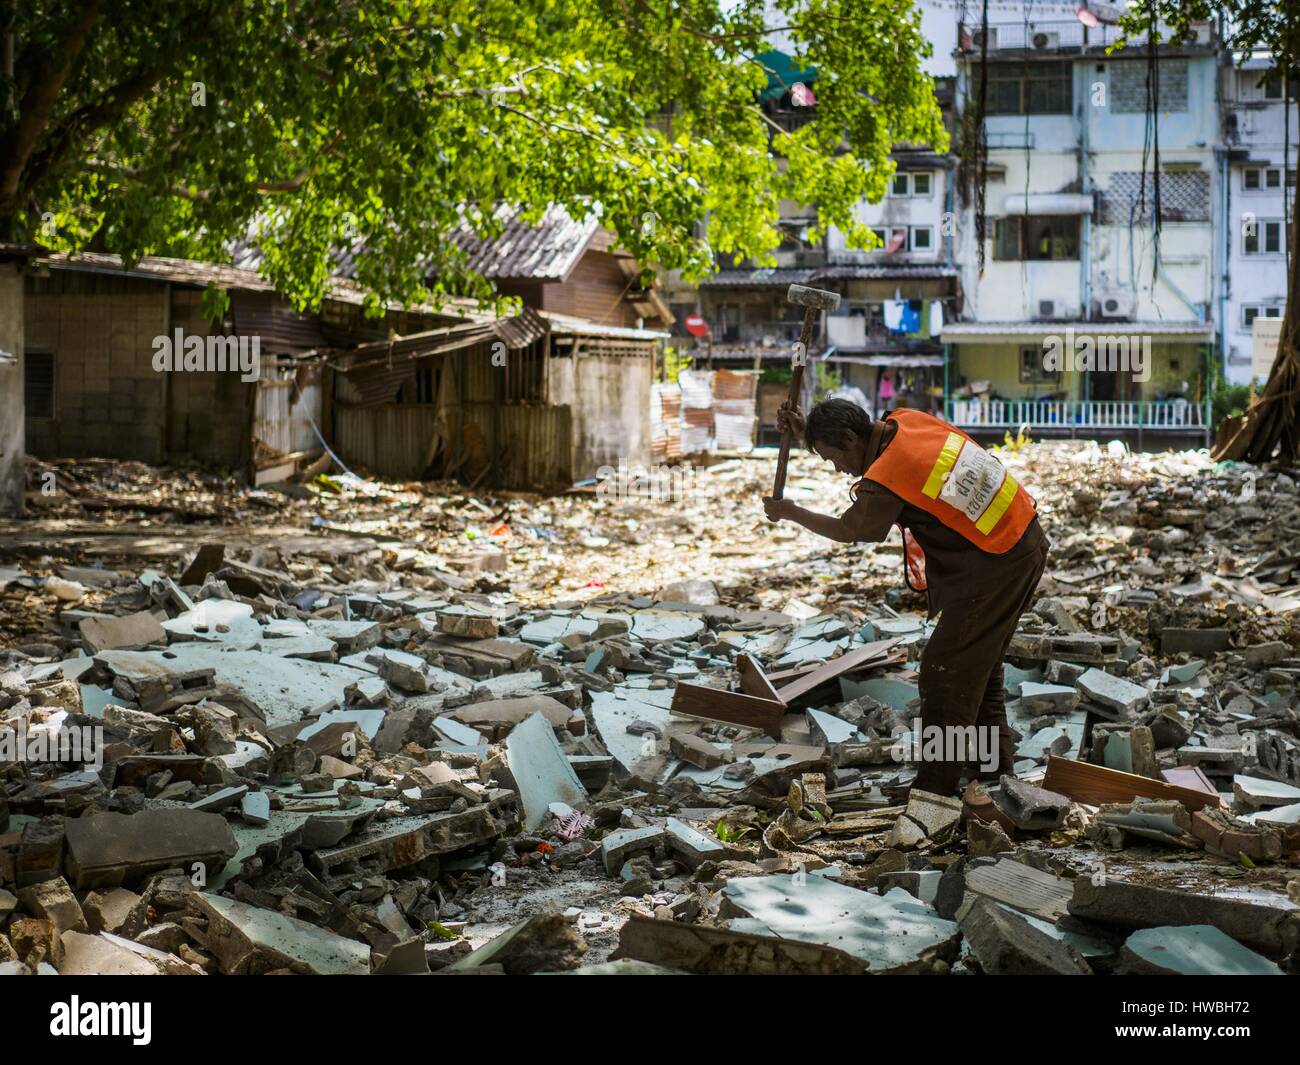 Bangkok, Bangkok, Thailand. 20th Mar, 2017. A city worker uses a sledge hammer to break up the floor of what used to be a home in Pom Mahakan. The family who lived there was evicted and the home torn down. The final evictions of the remaining families in Pom Mahakan, a slum community in a 19th century fort in Bangkok, have started. City officials are moving the residents out of the fort. NGOs and historic preservation organizations protested the city's action but city officials did not relent and started evicting the remaining families in early March. (Credit Image: © Jack Kurtz via ZUMA Wir Stock Photo